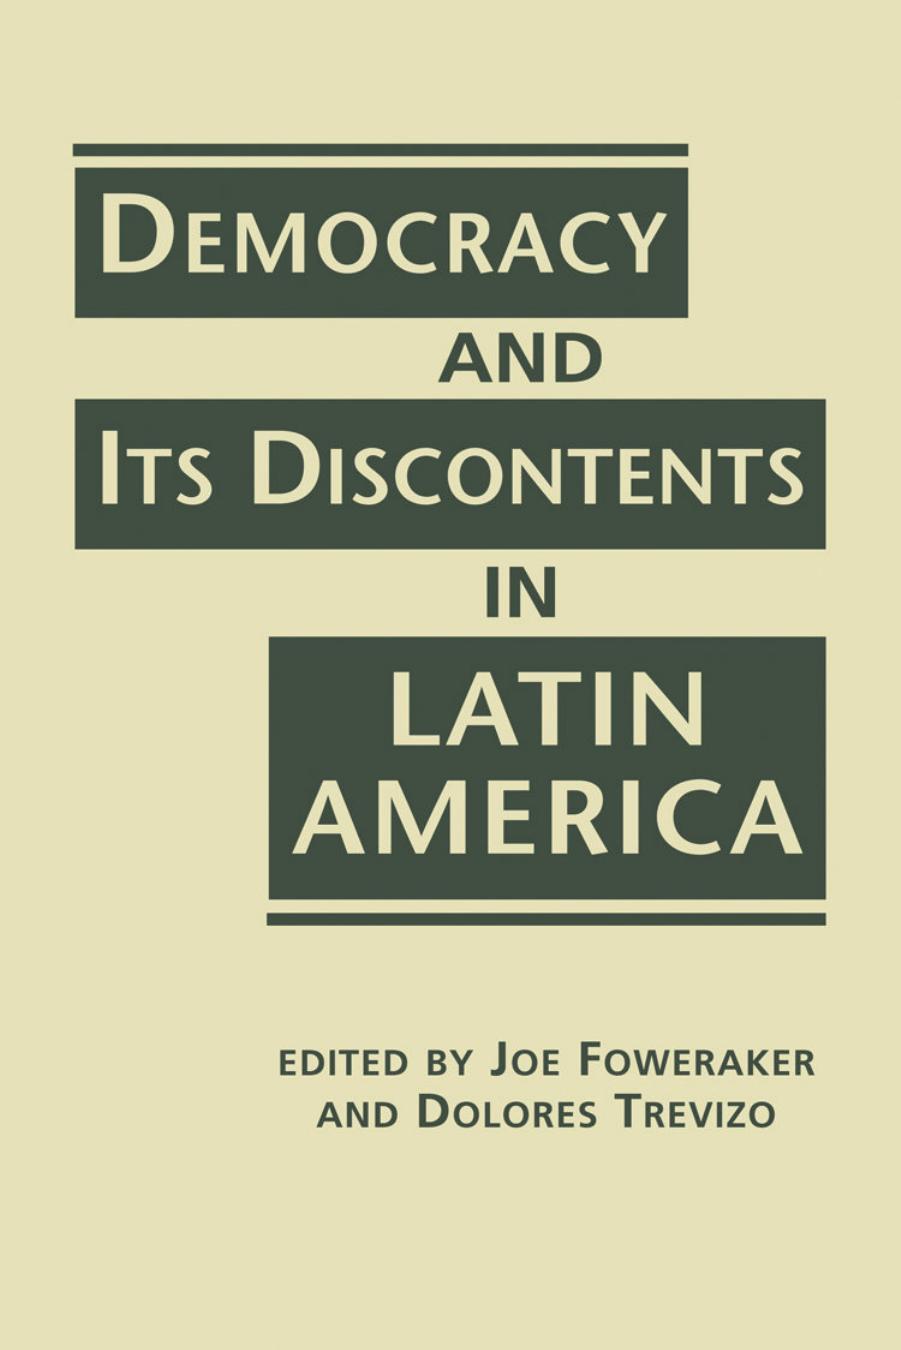 Democracy and Its Discontents in Latin America.jpg